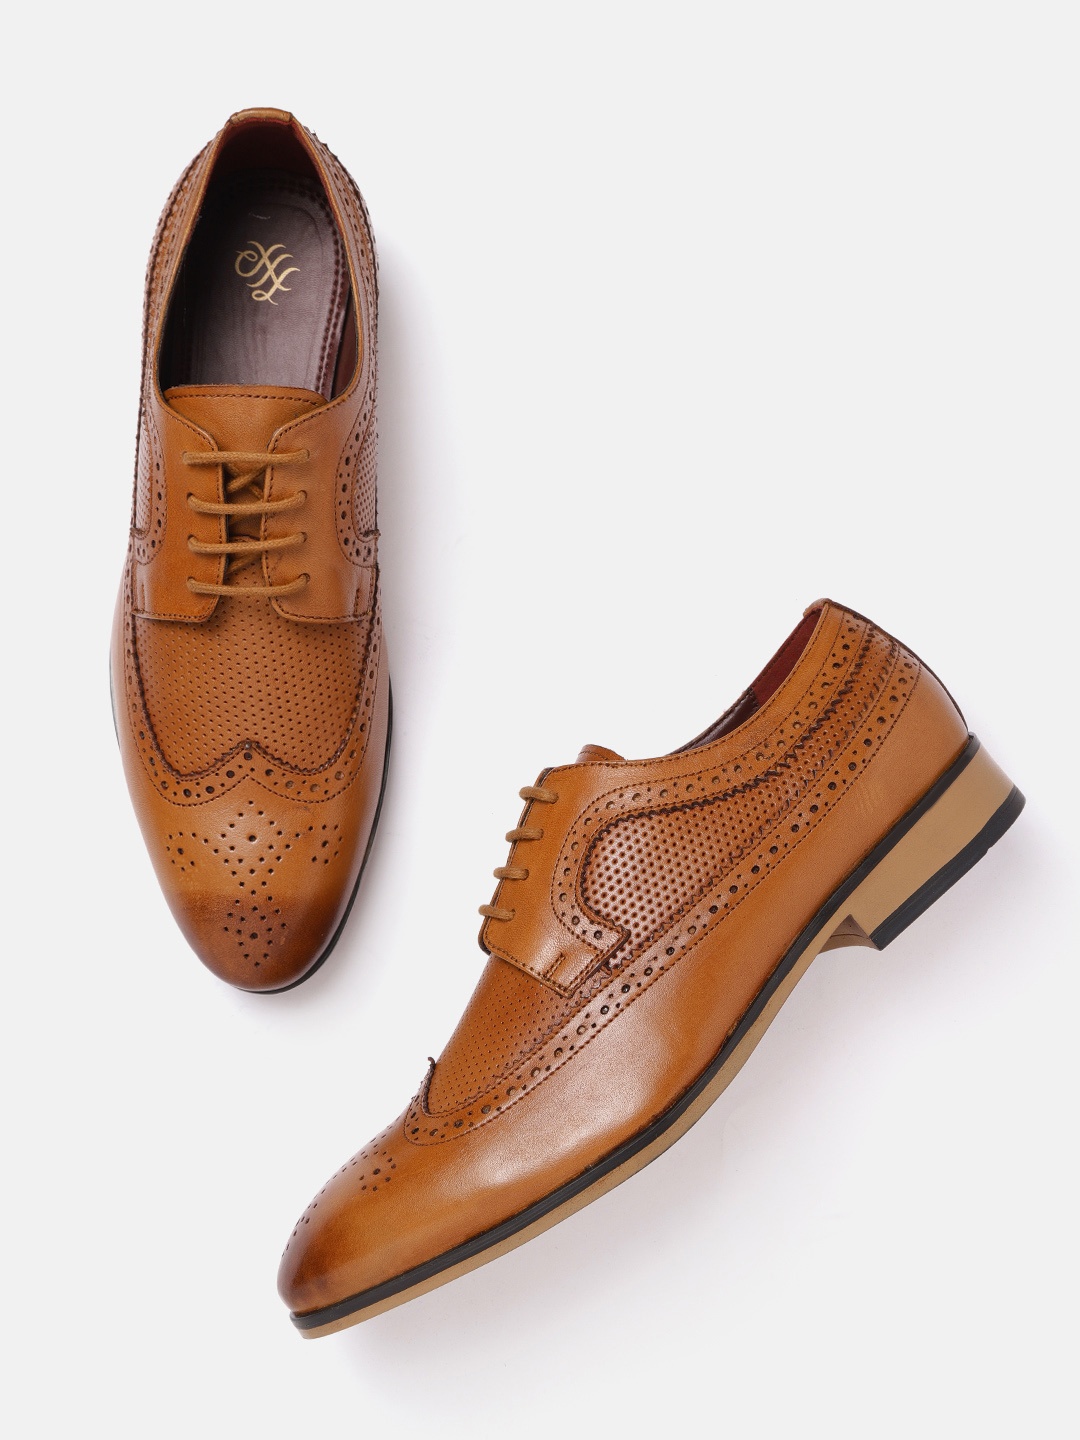 

House of Pataudi Men Tan Brown Handcrafted Perforated Leather Formal Brogues